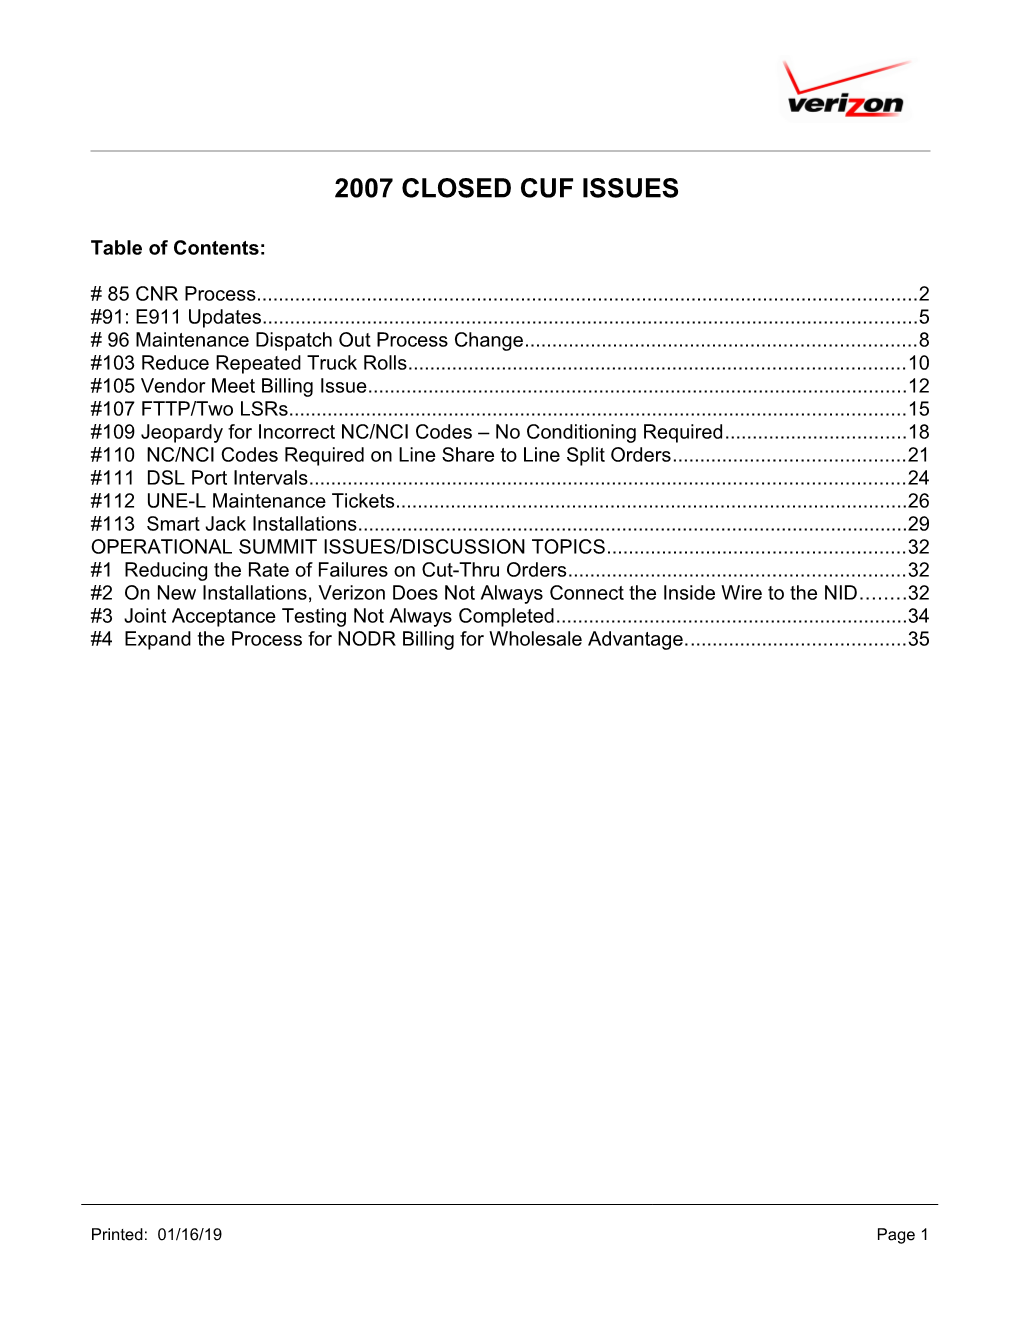 2007 Closed Cuf Issues